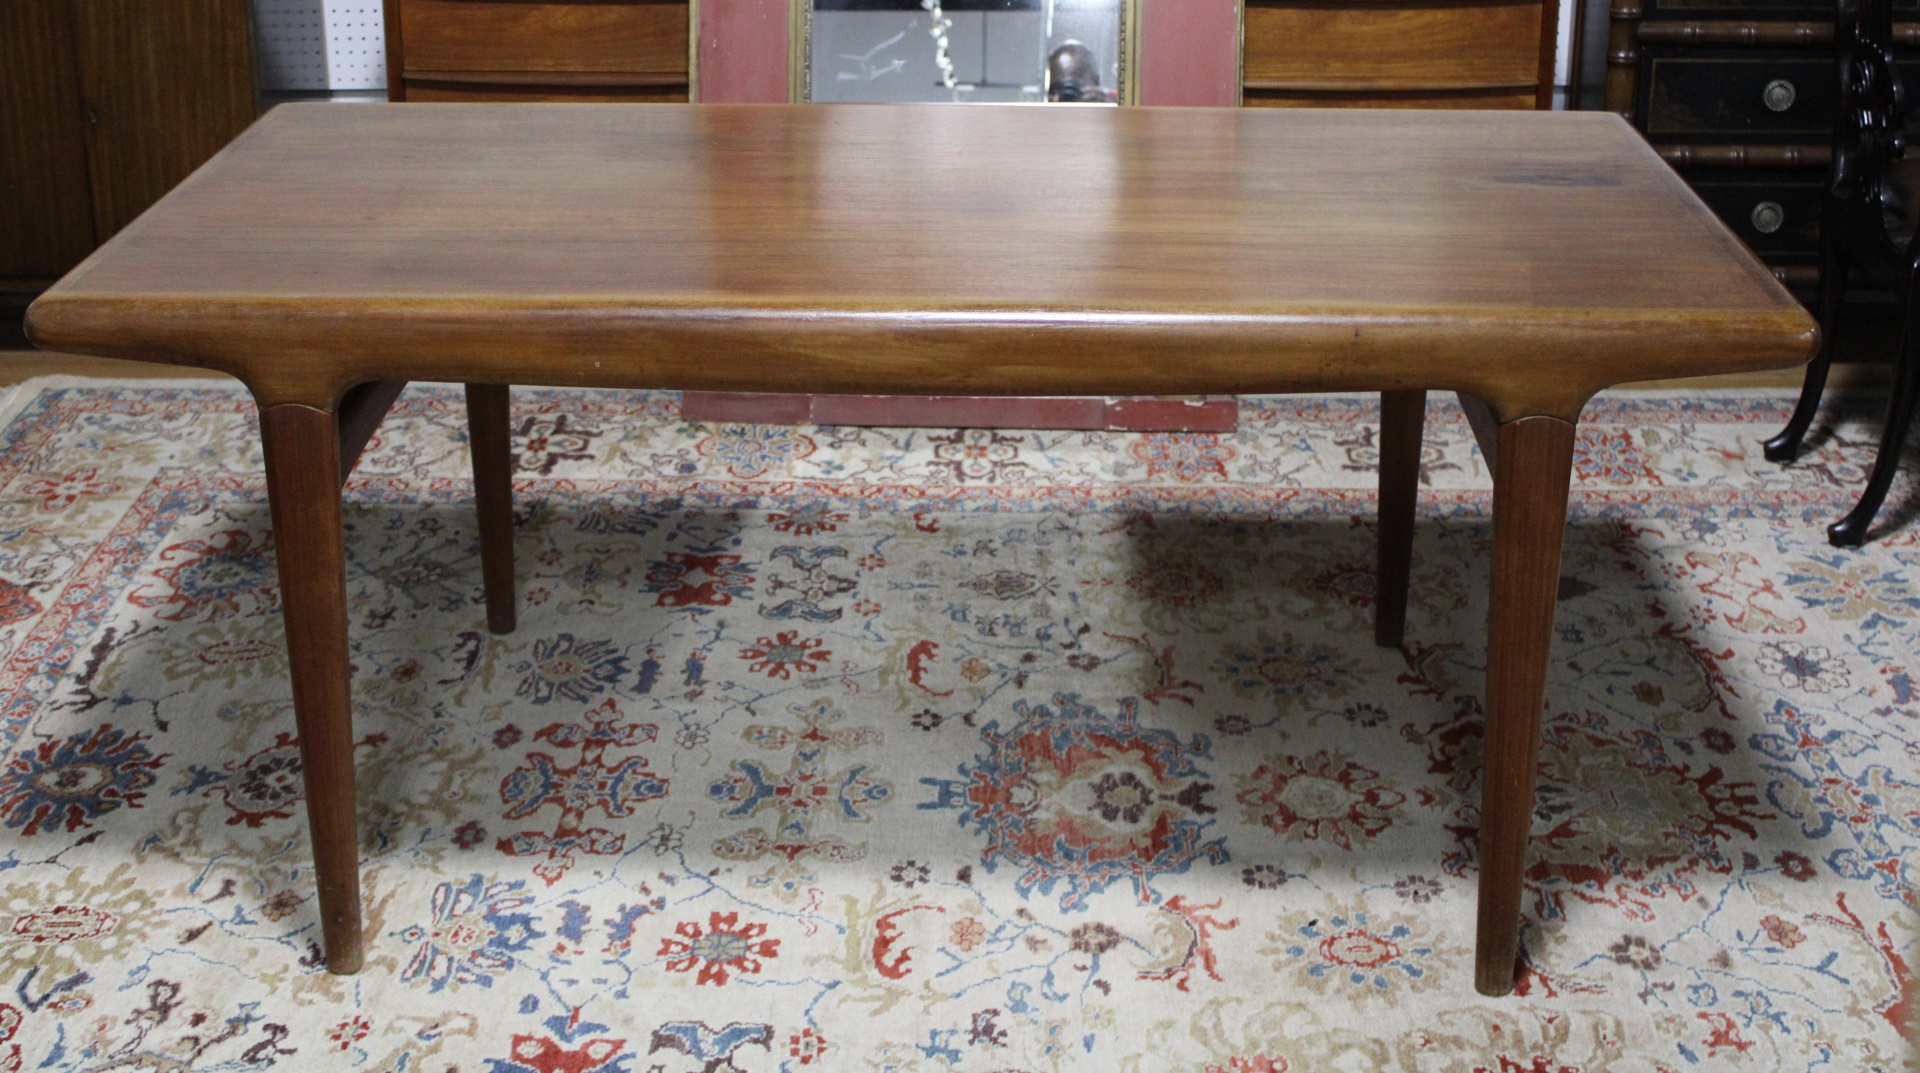 MIDCENTURY REFRACTORY TABLE This 3ba168